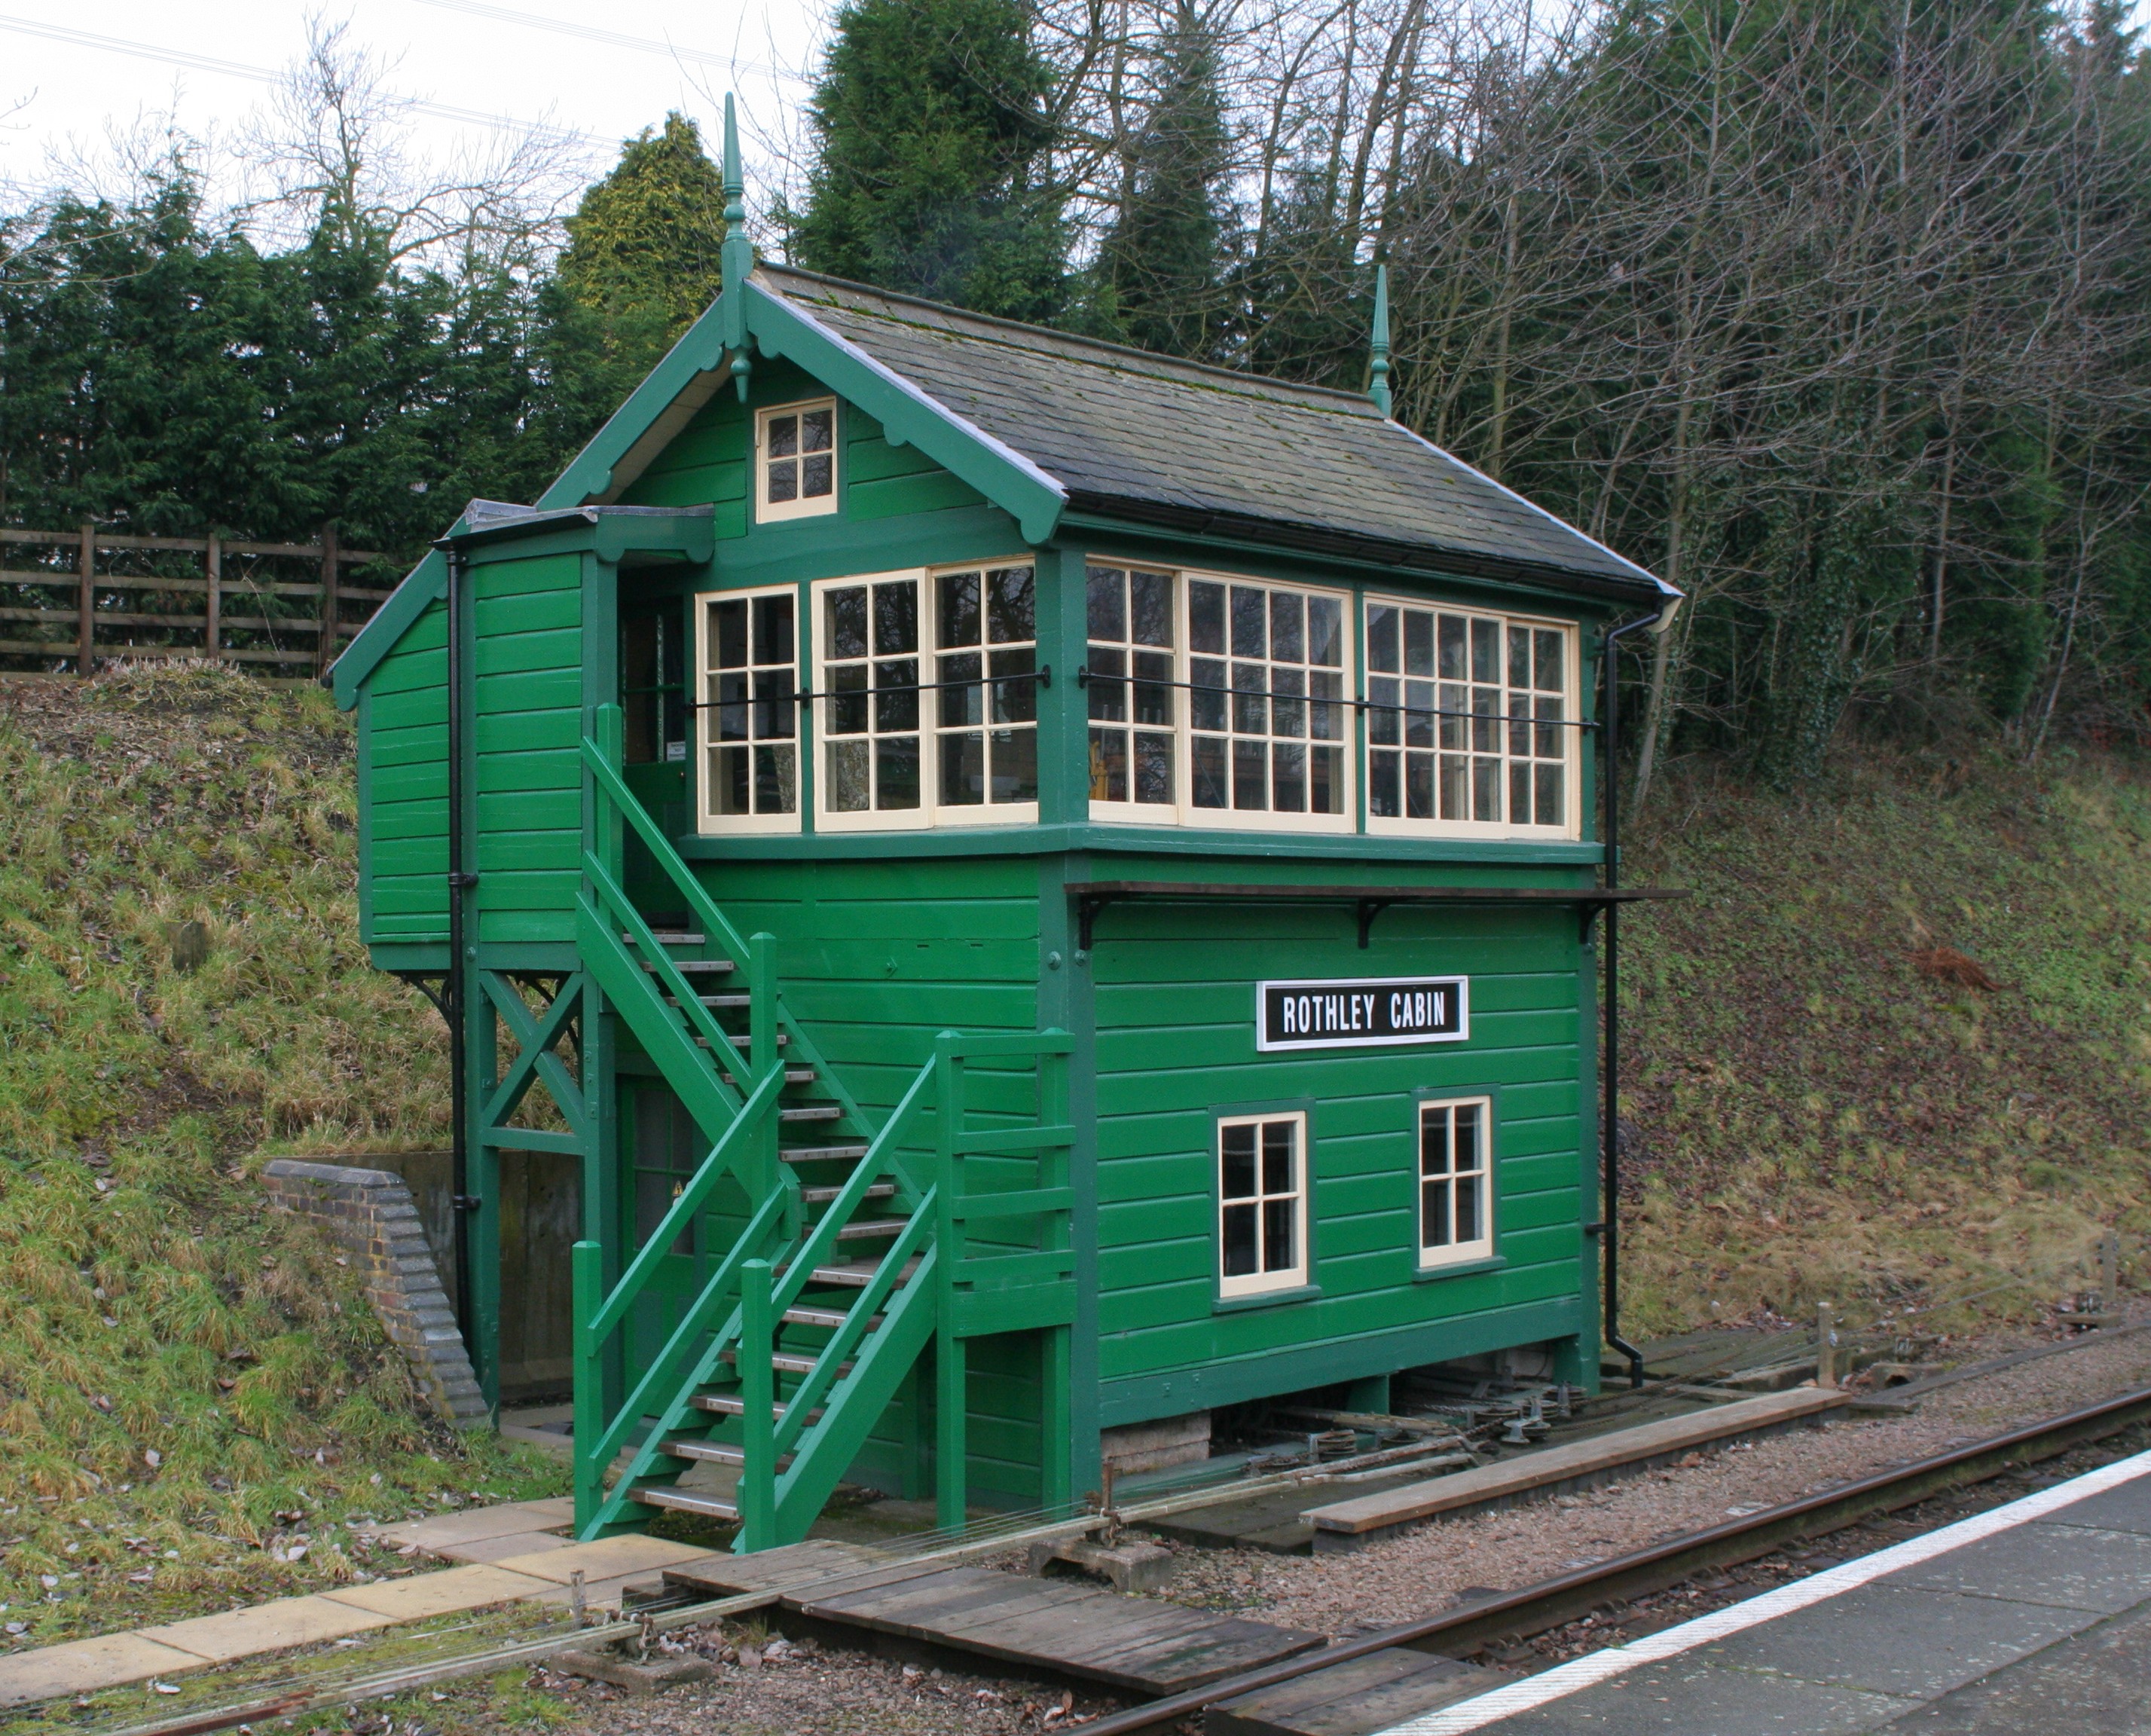 File:Rothley signal box on the Great Central Railway heritage ...